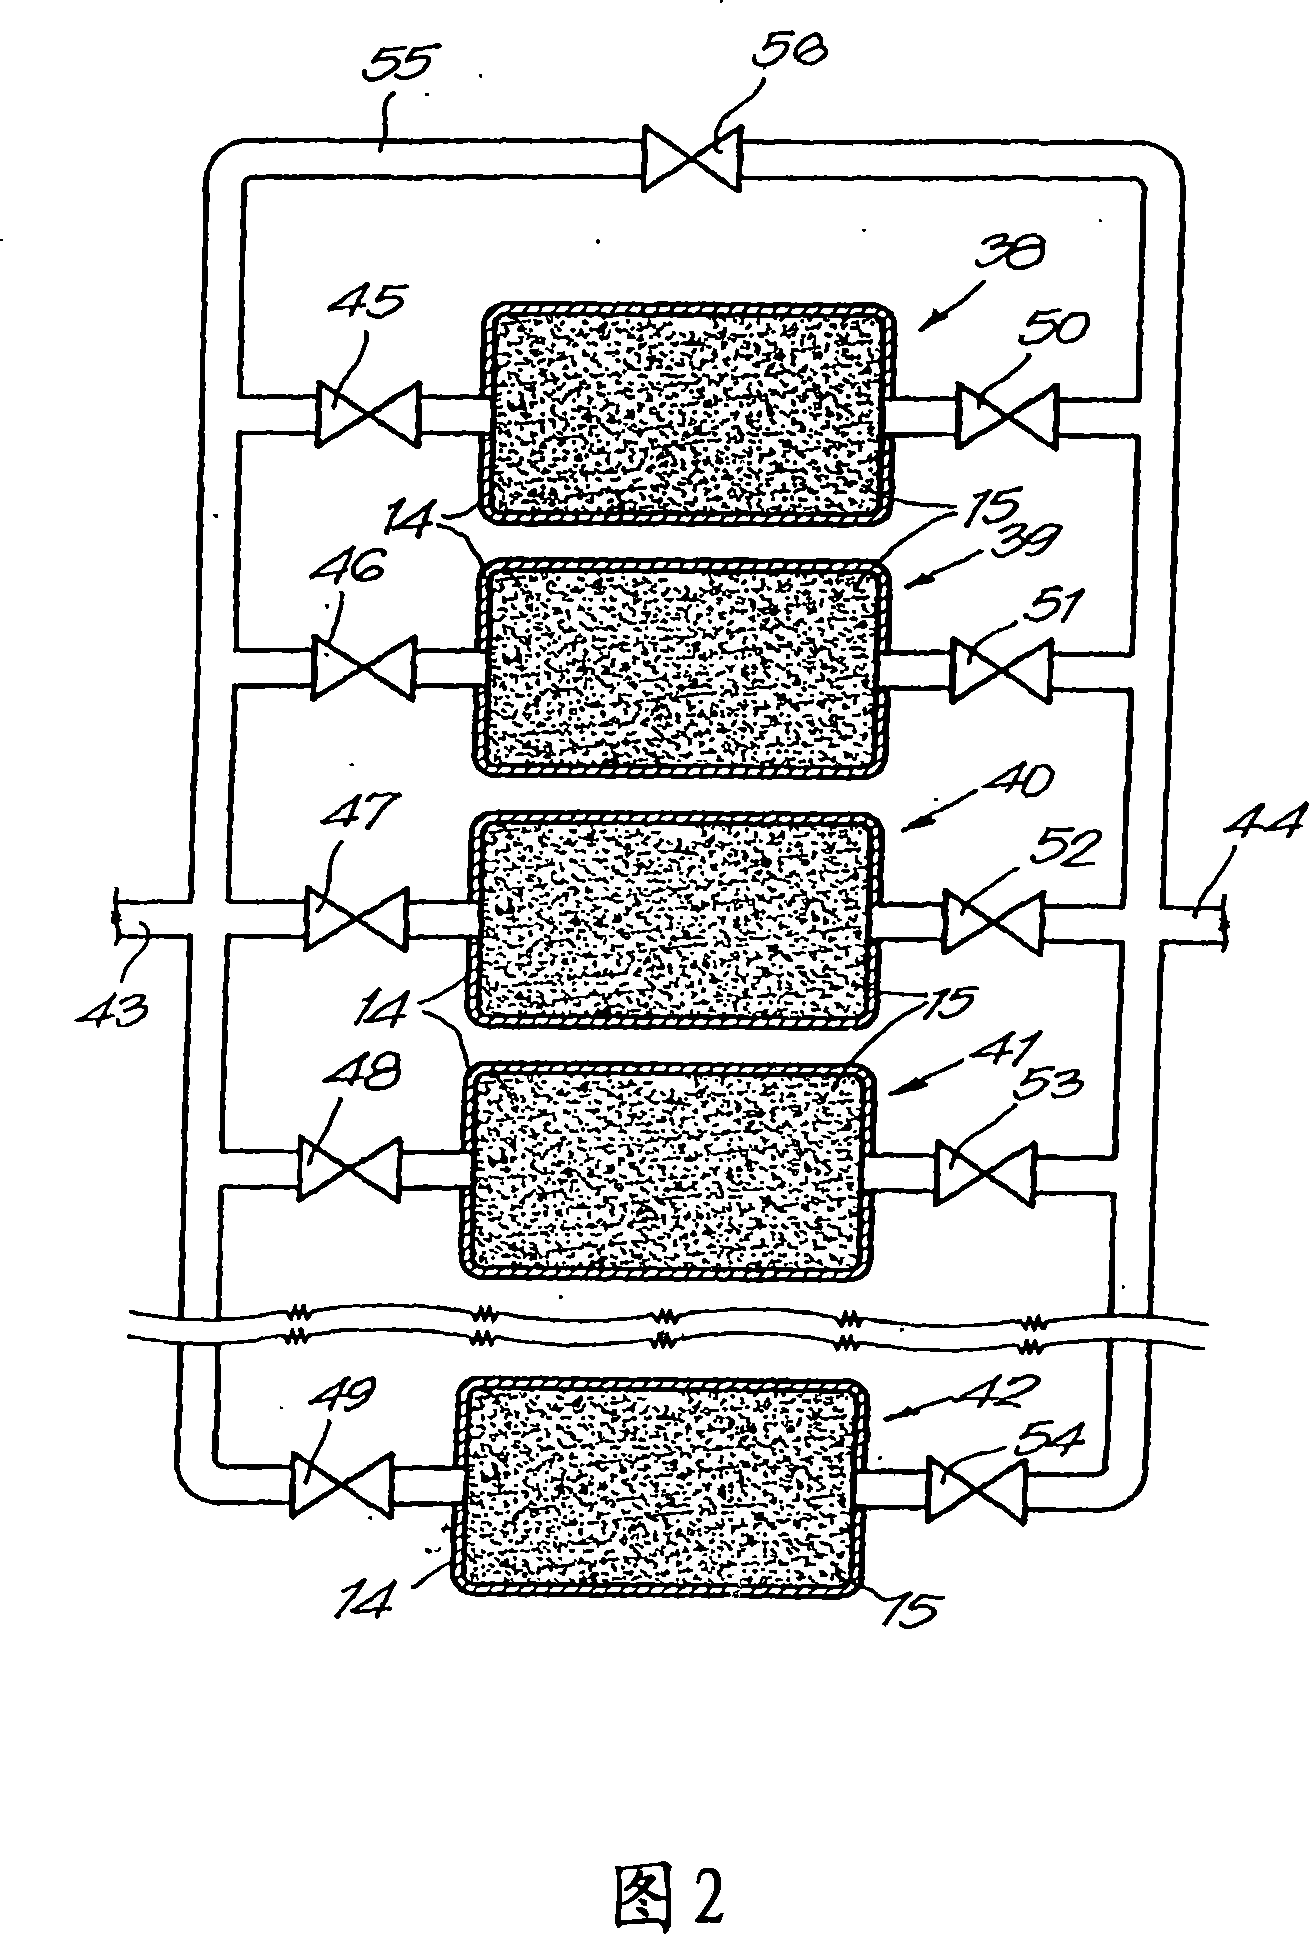 Method and device for fumigating products in an enclosed space